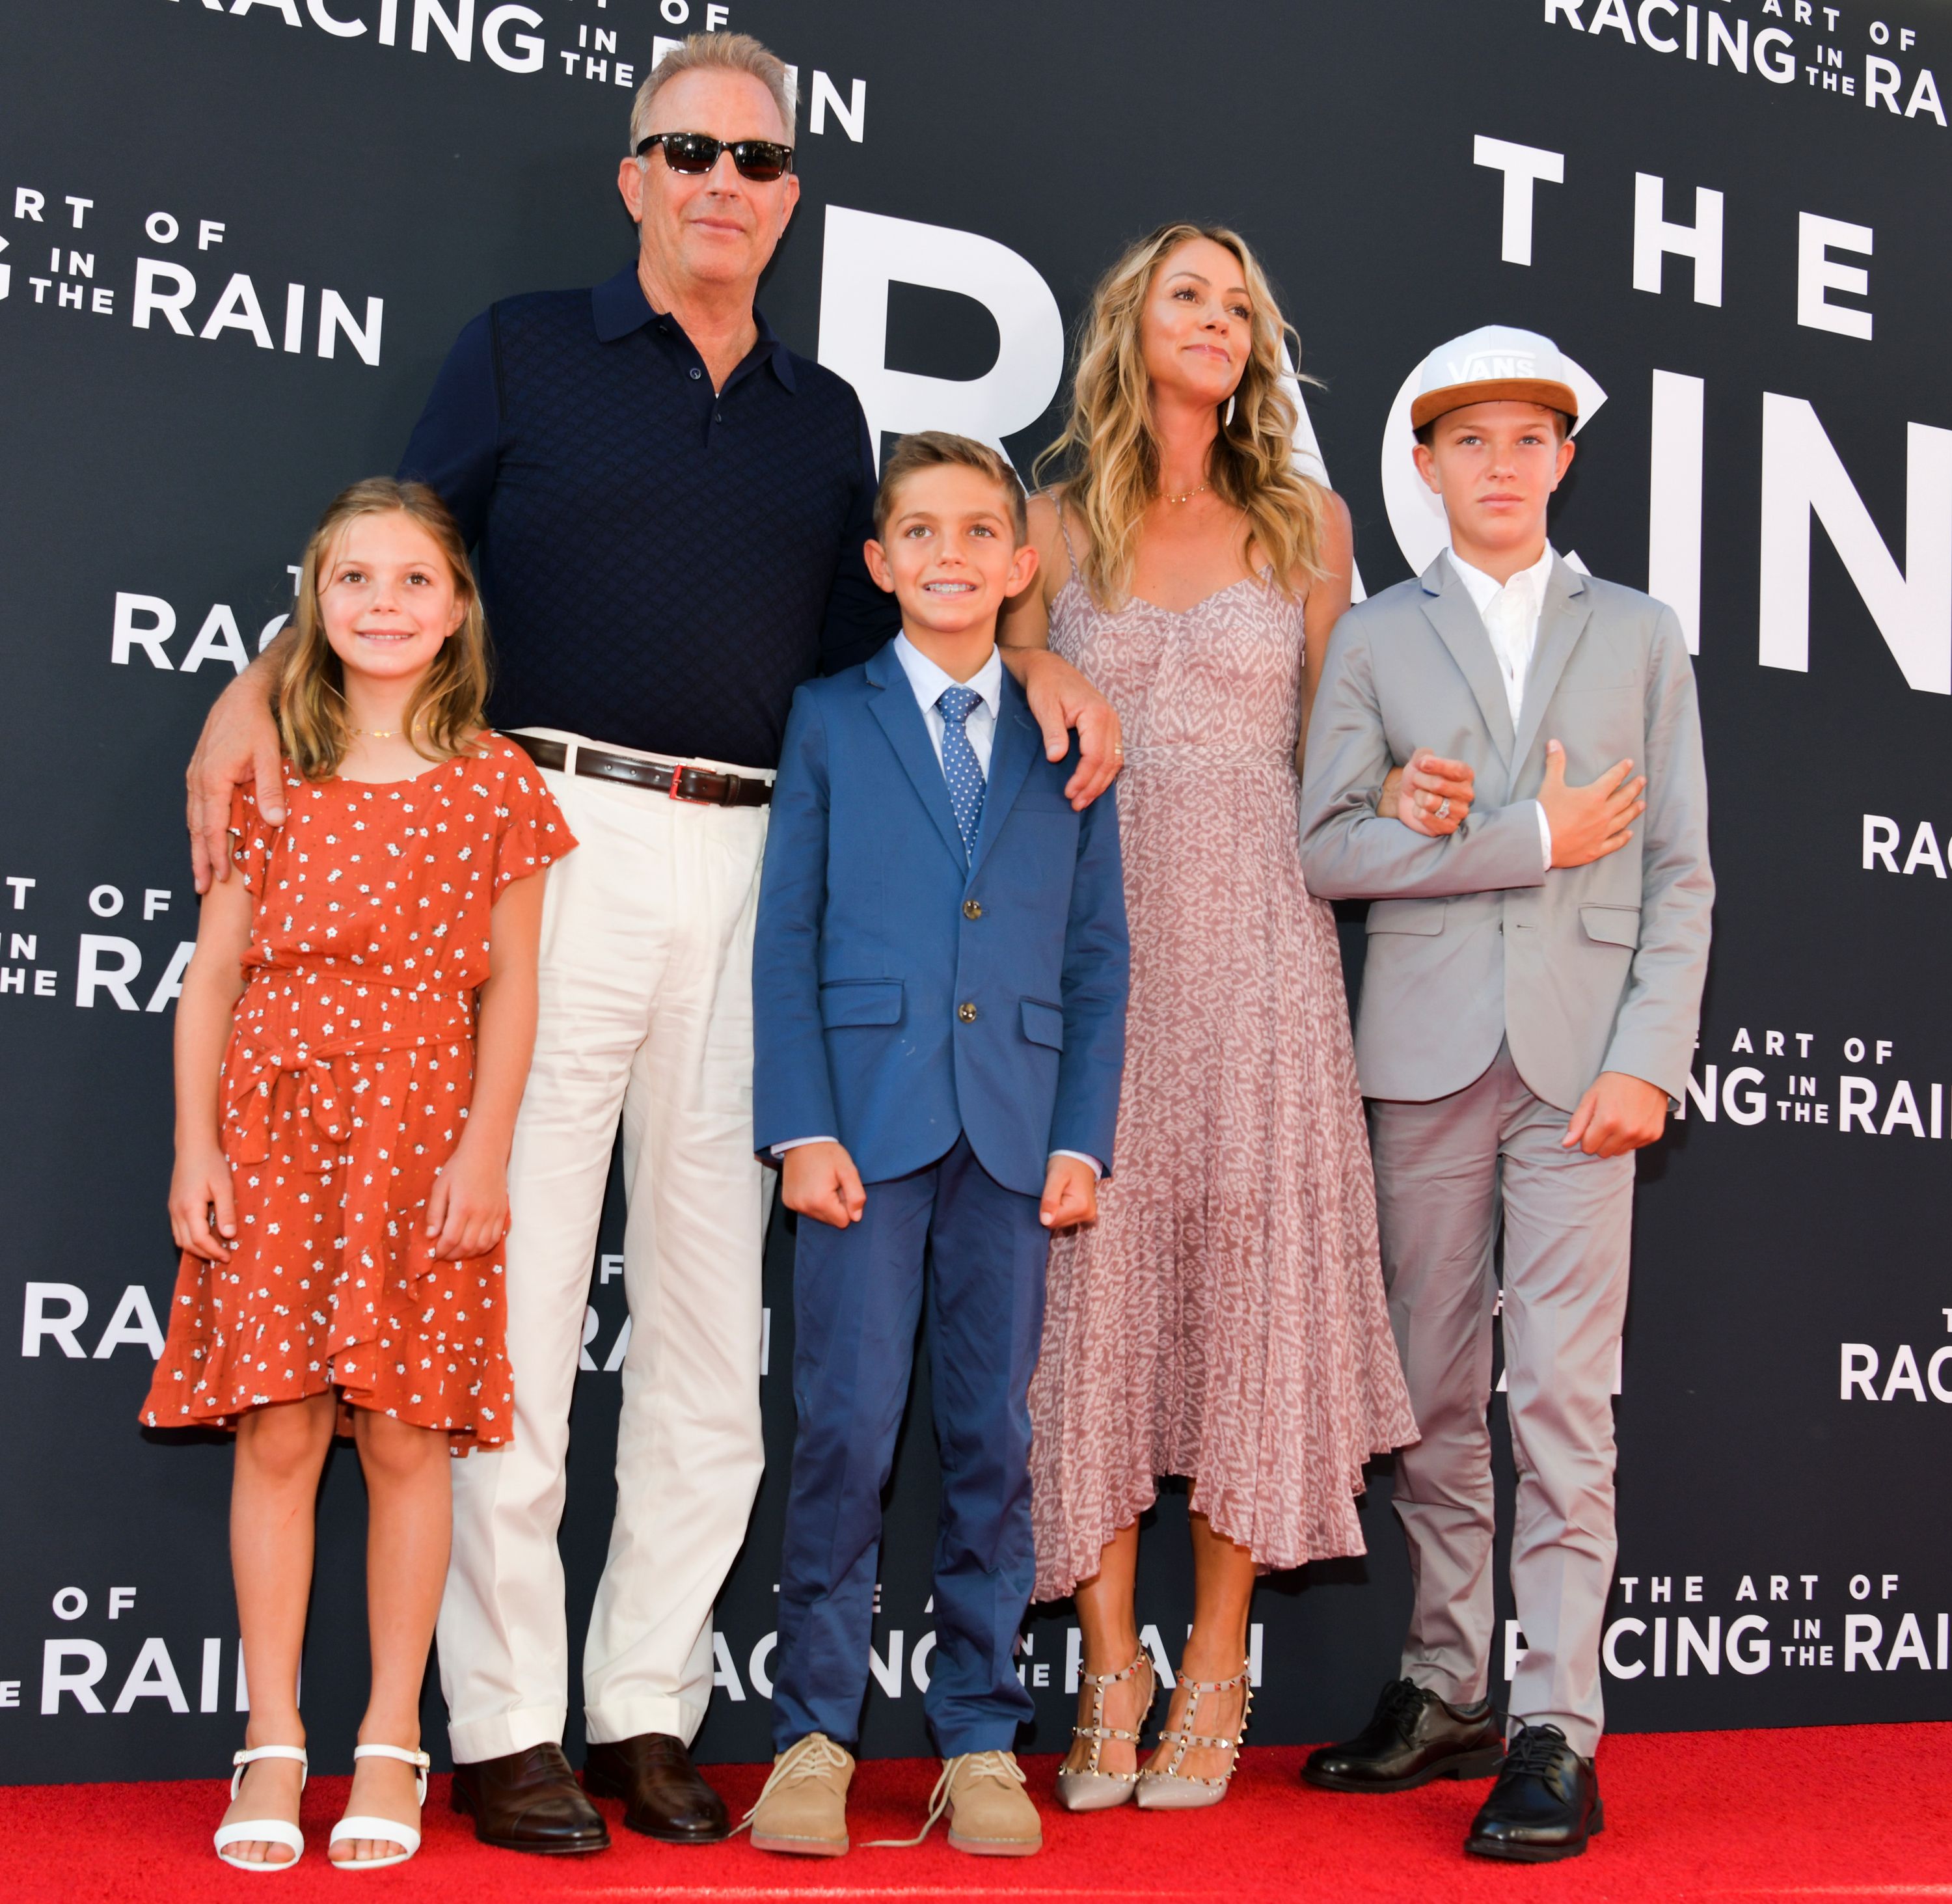 Grace Avery Costner, Kevin Costner, Hayes Logan Costner, Christine Baumgartner, and Cayden Wyatt Costner during the premiere of 20th Century Fox's "The Art of Racing in the Rain" at El Capitan Theatre on August 01, 2019, in Los Angeles, California. | Source: Getty Images